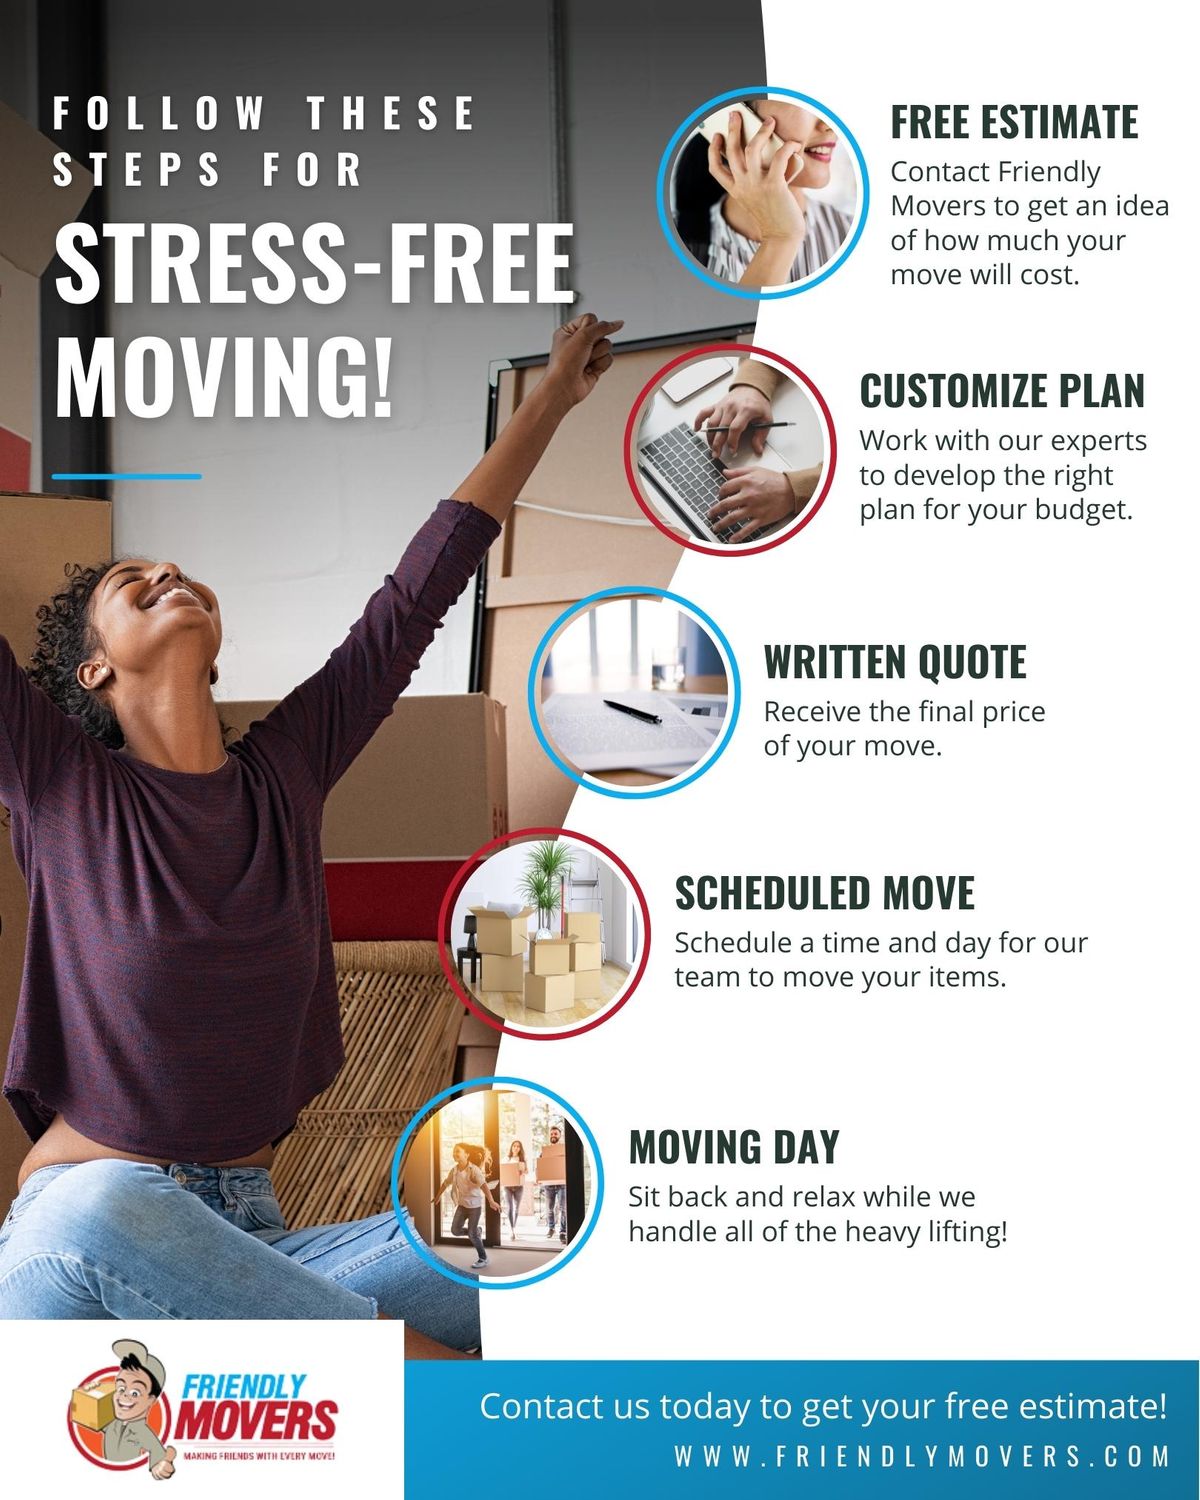 Follow these steps for stress-free moving.jpg